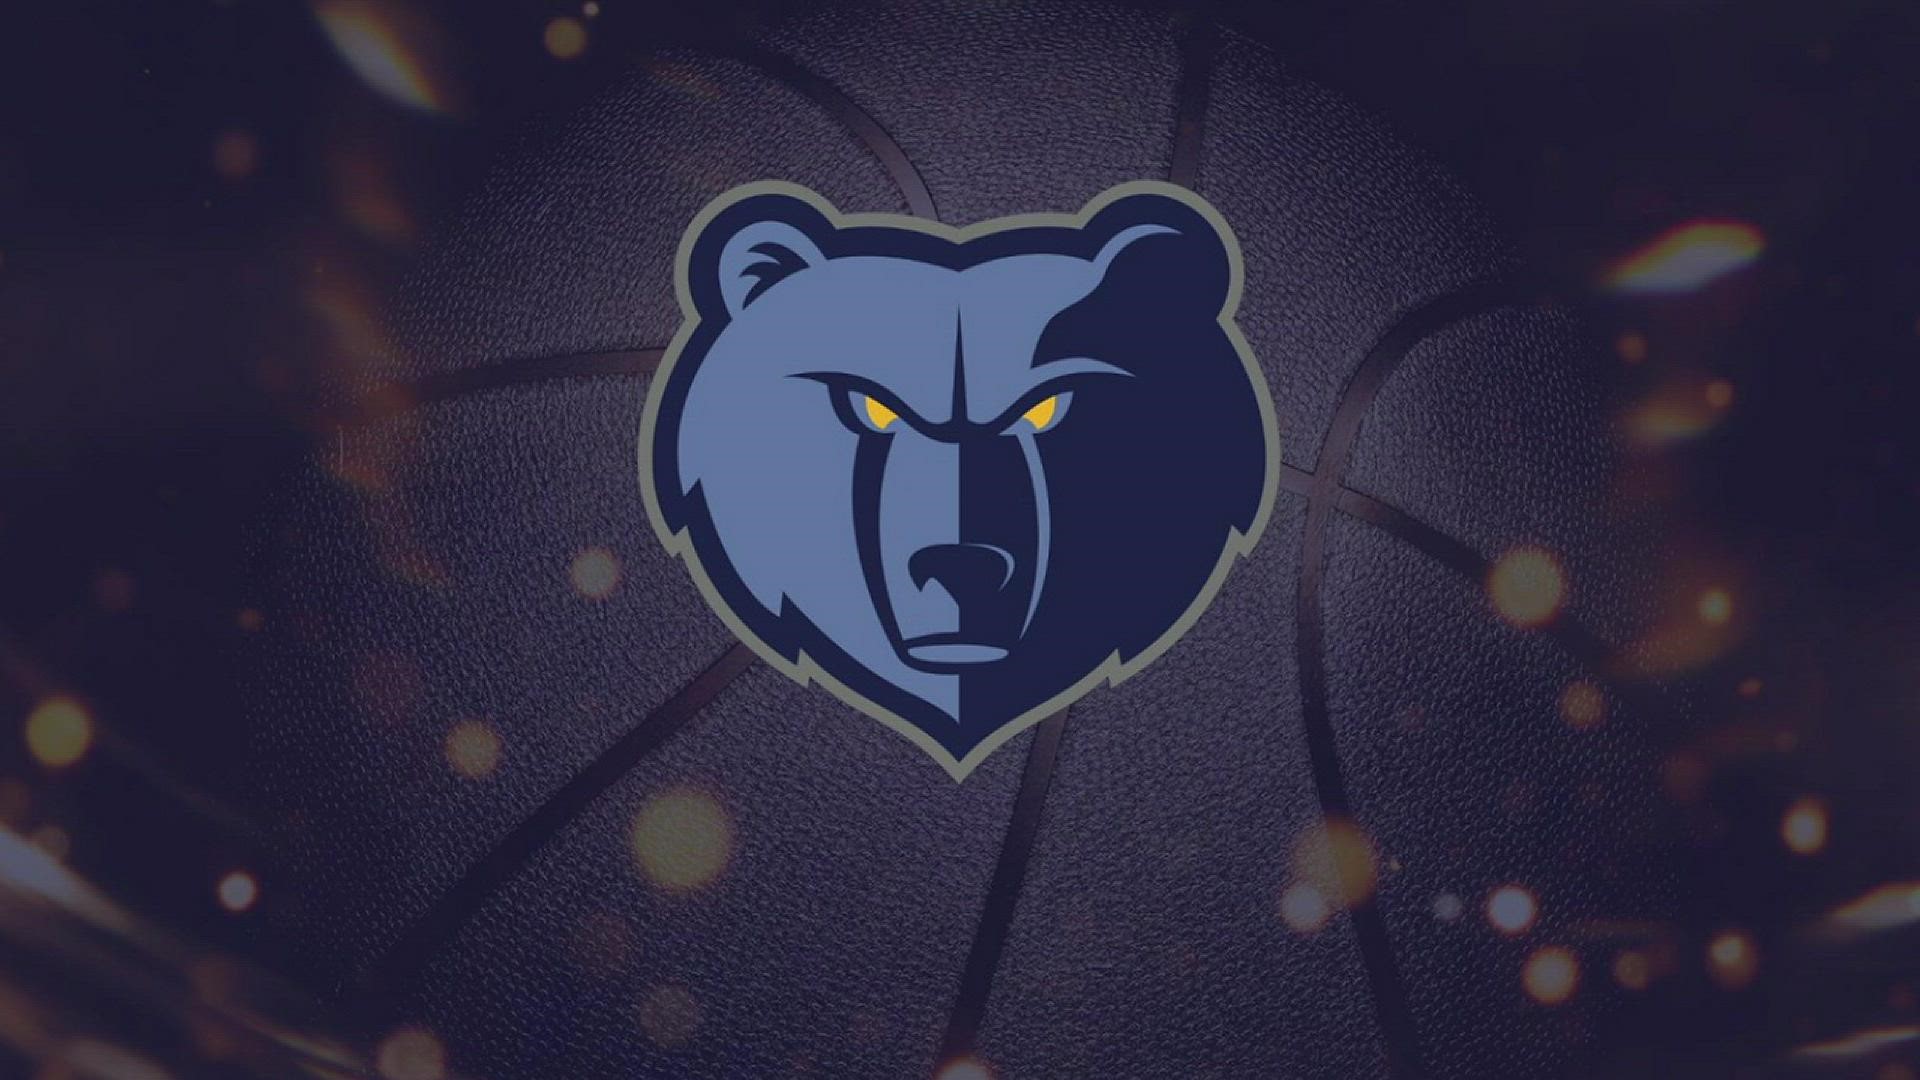 Shawn Coleman speculates on the big storylines facing the Grizzlies in Summer League and the offseason